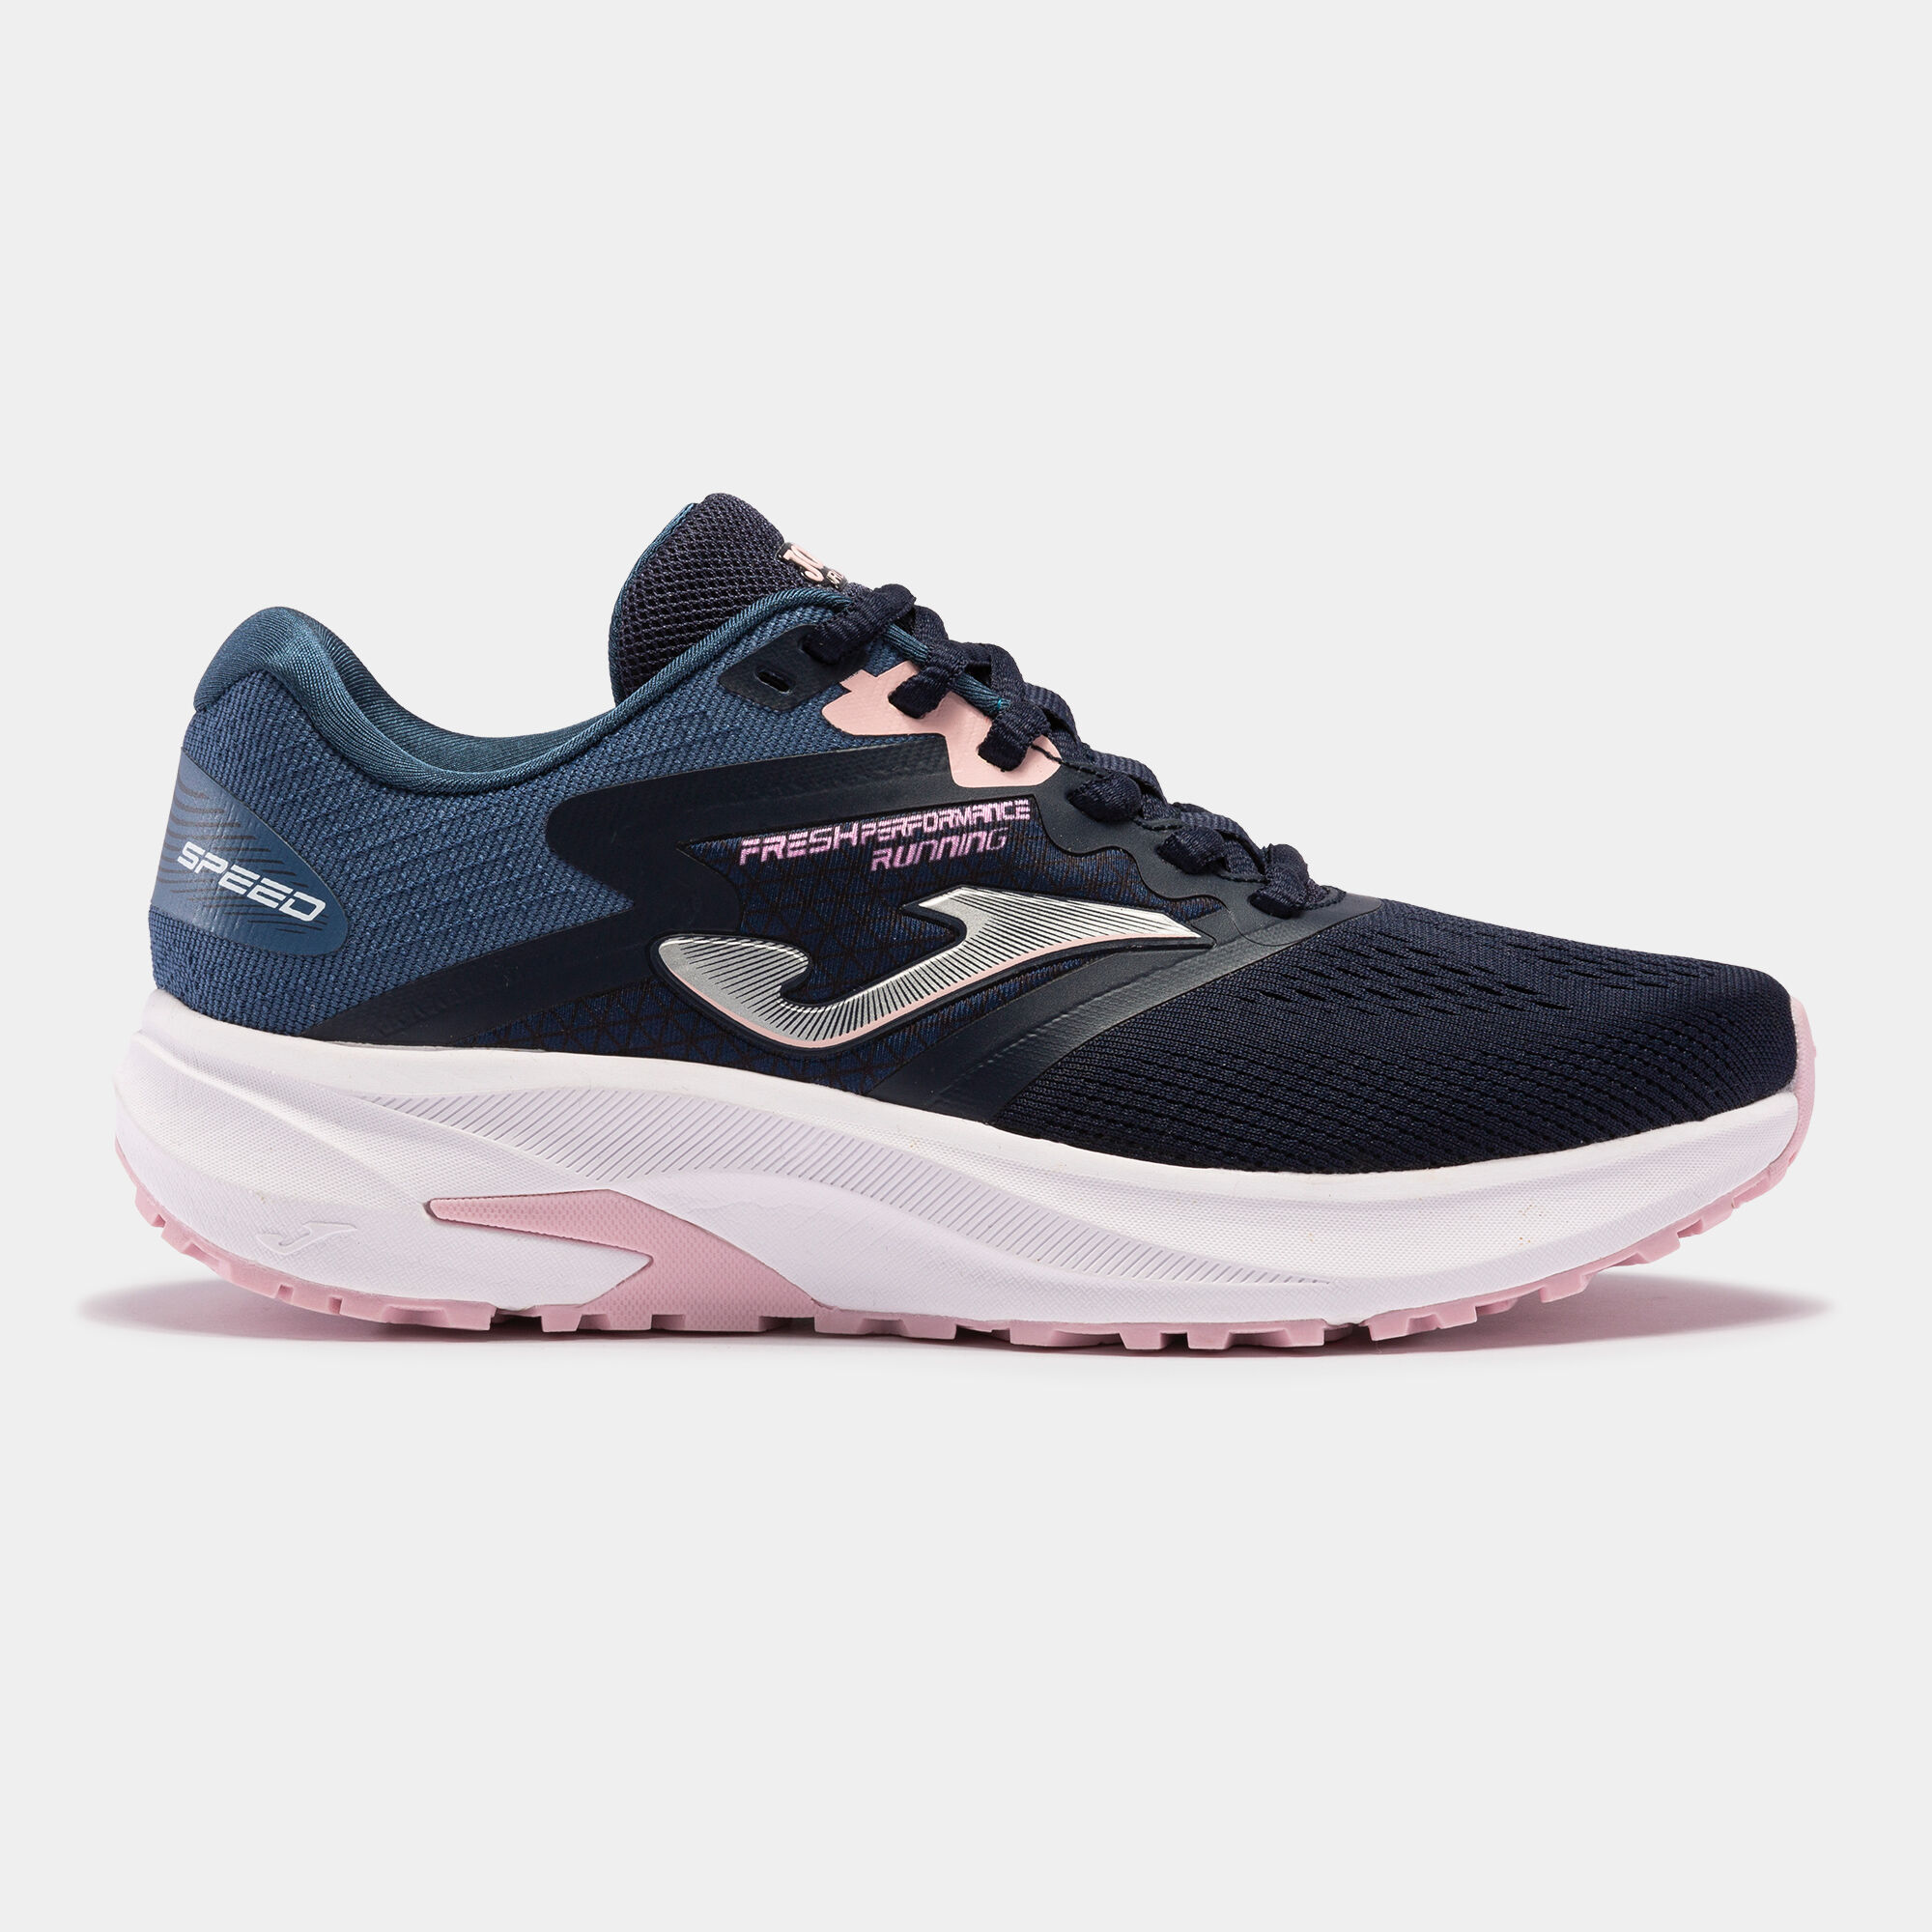 Running shoes Speed Lady 23 woman navy blue pink